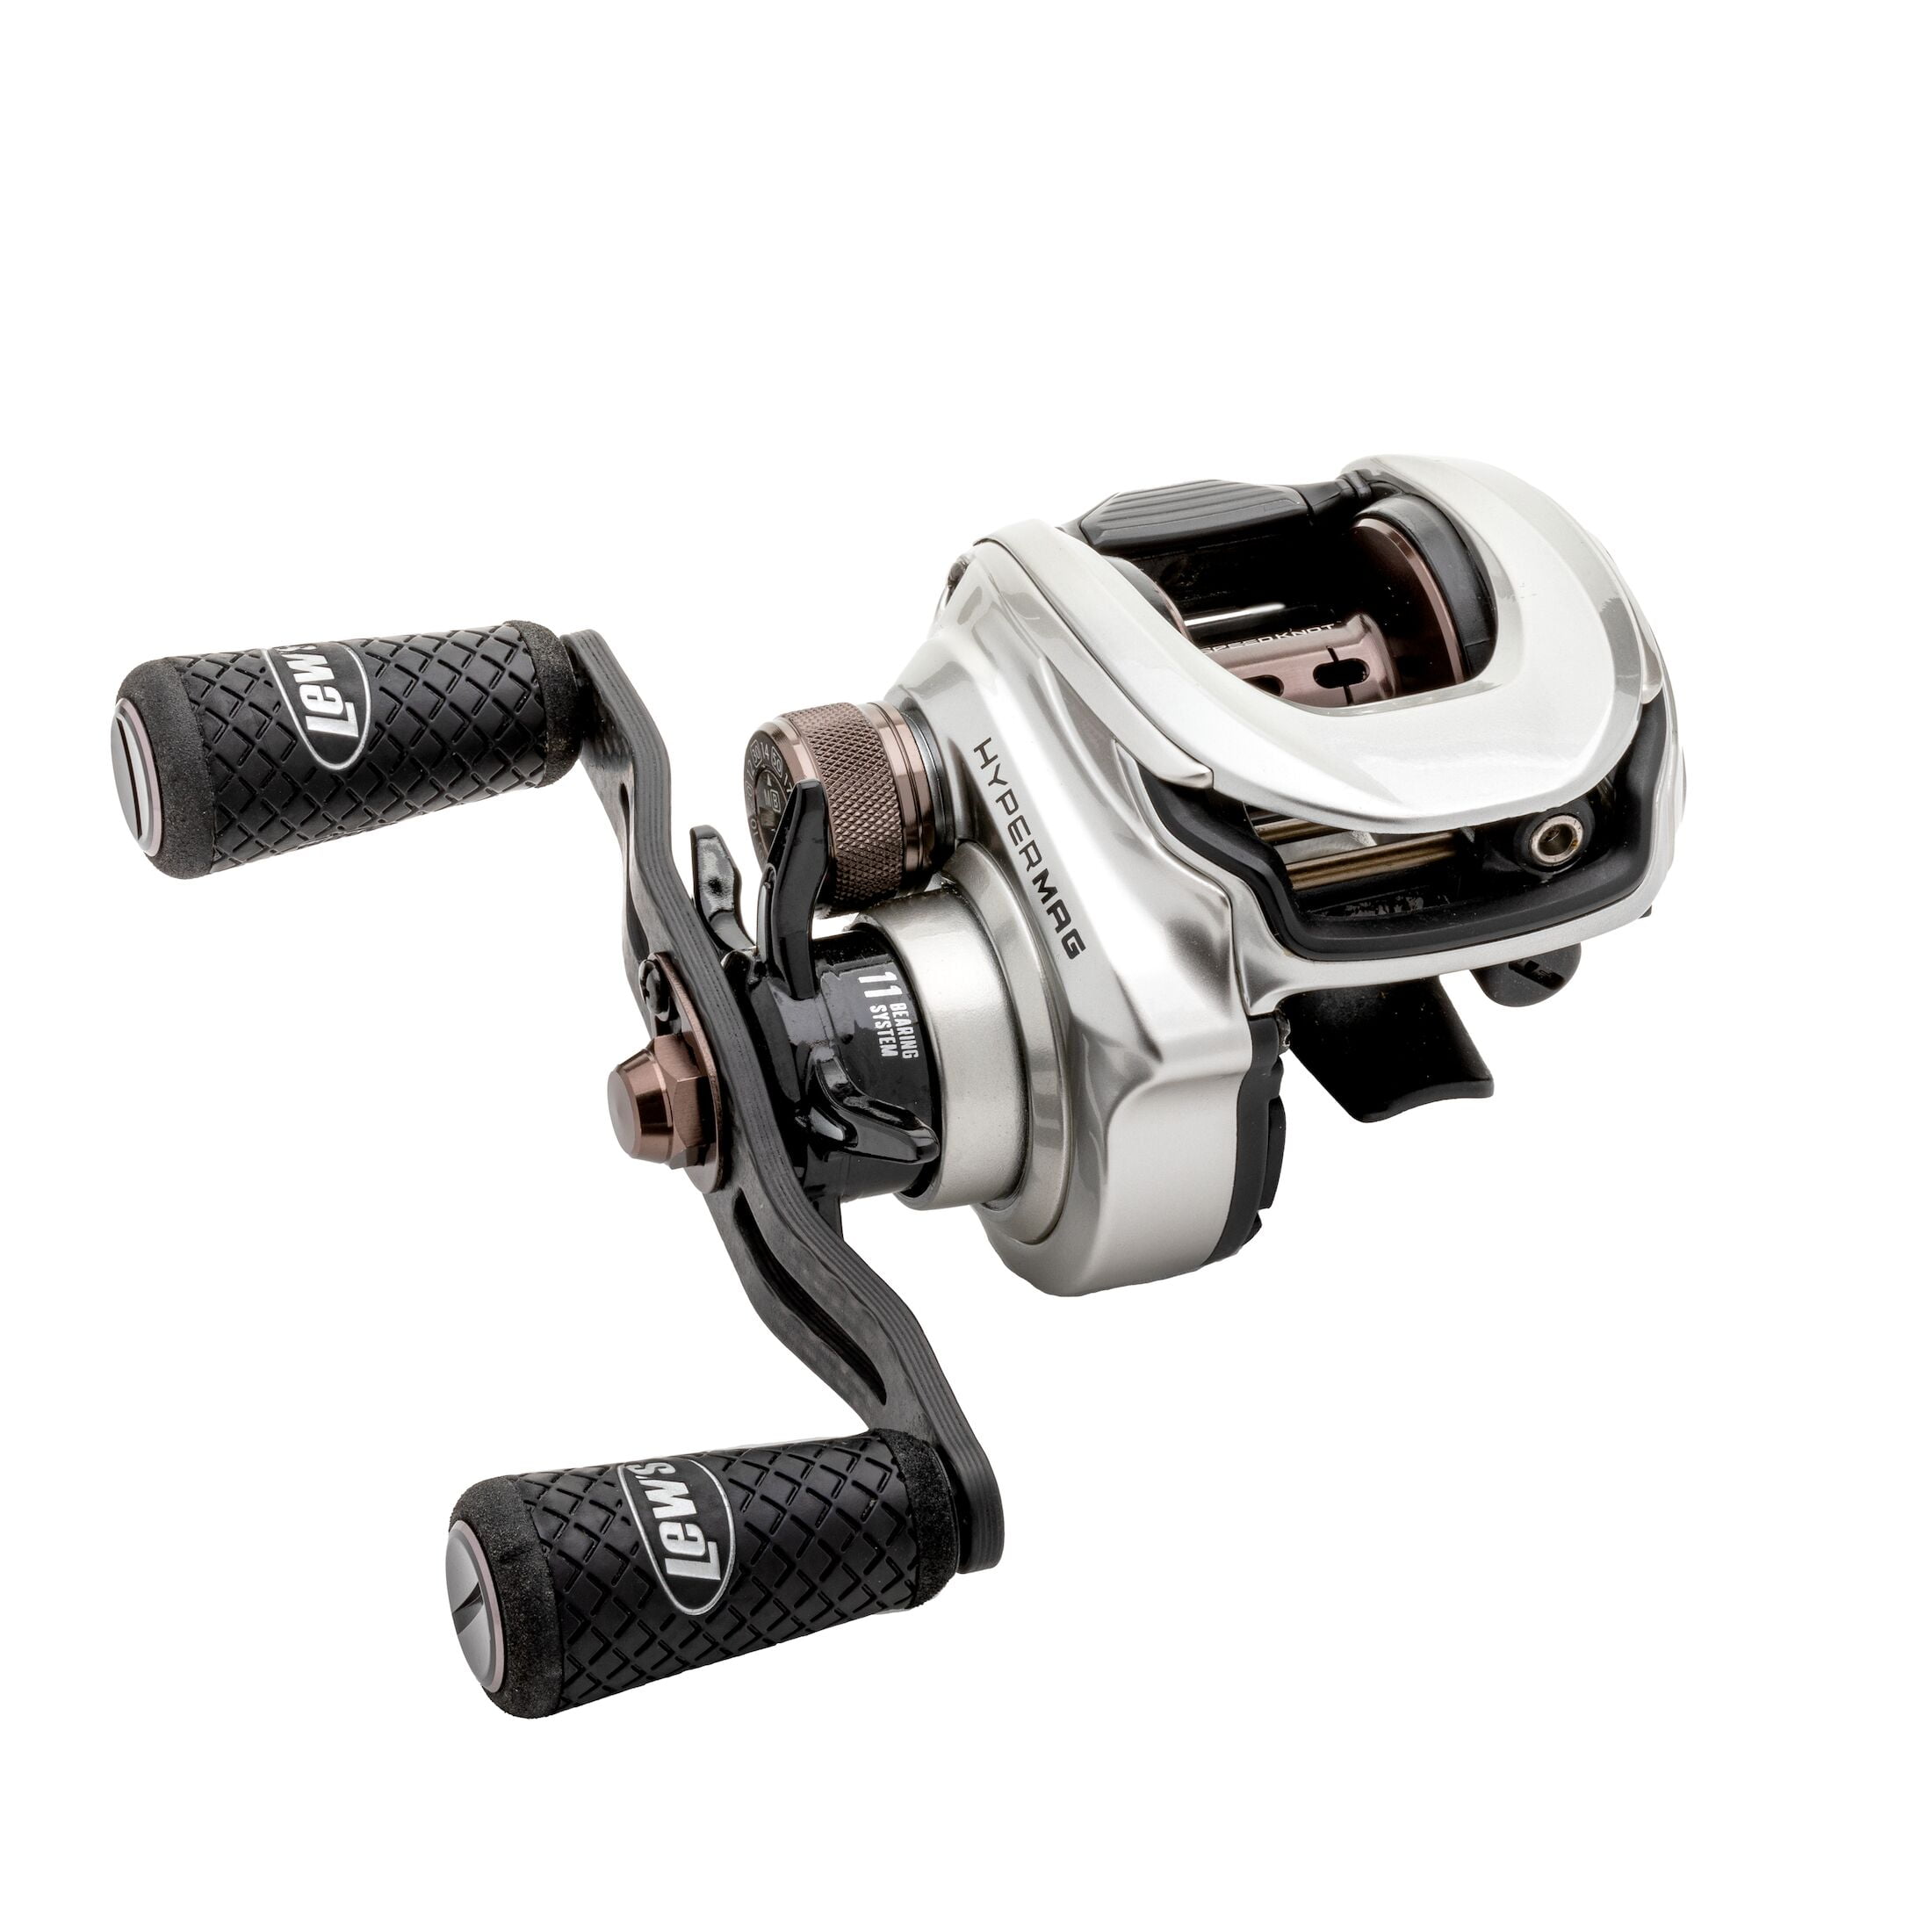 Shimano Sienna Spinning Reel 2500 Reel Size, 5.2:1 Gear Ratio, 29 Retrieve  Rate, Ambidextrous, Clam Package 